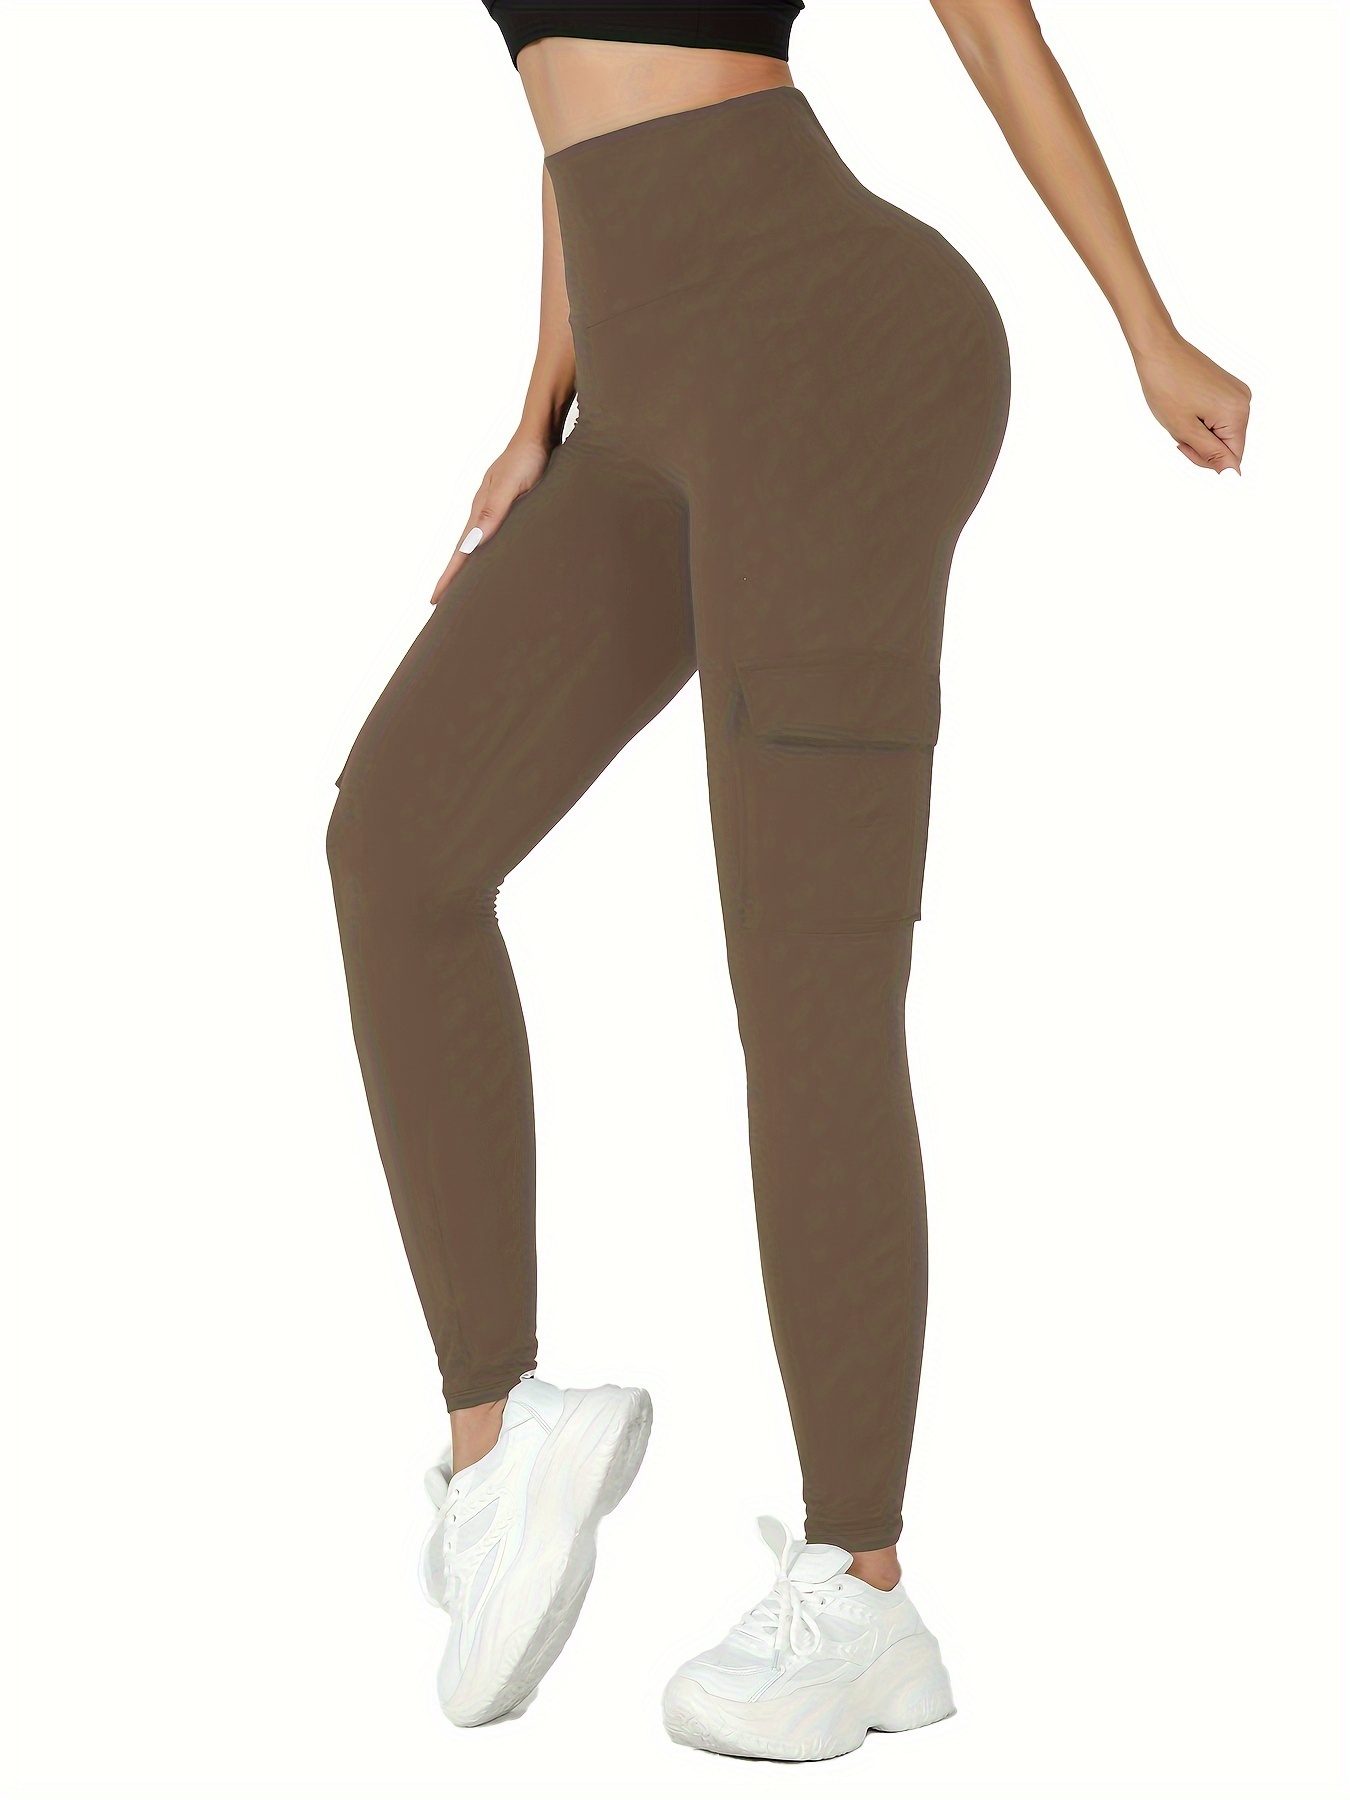  Leggings for Women with Pockets Women's No See-Through